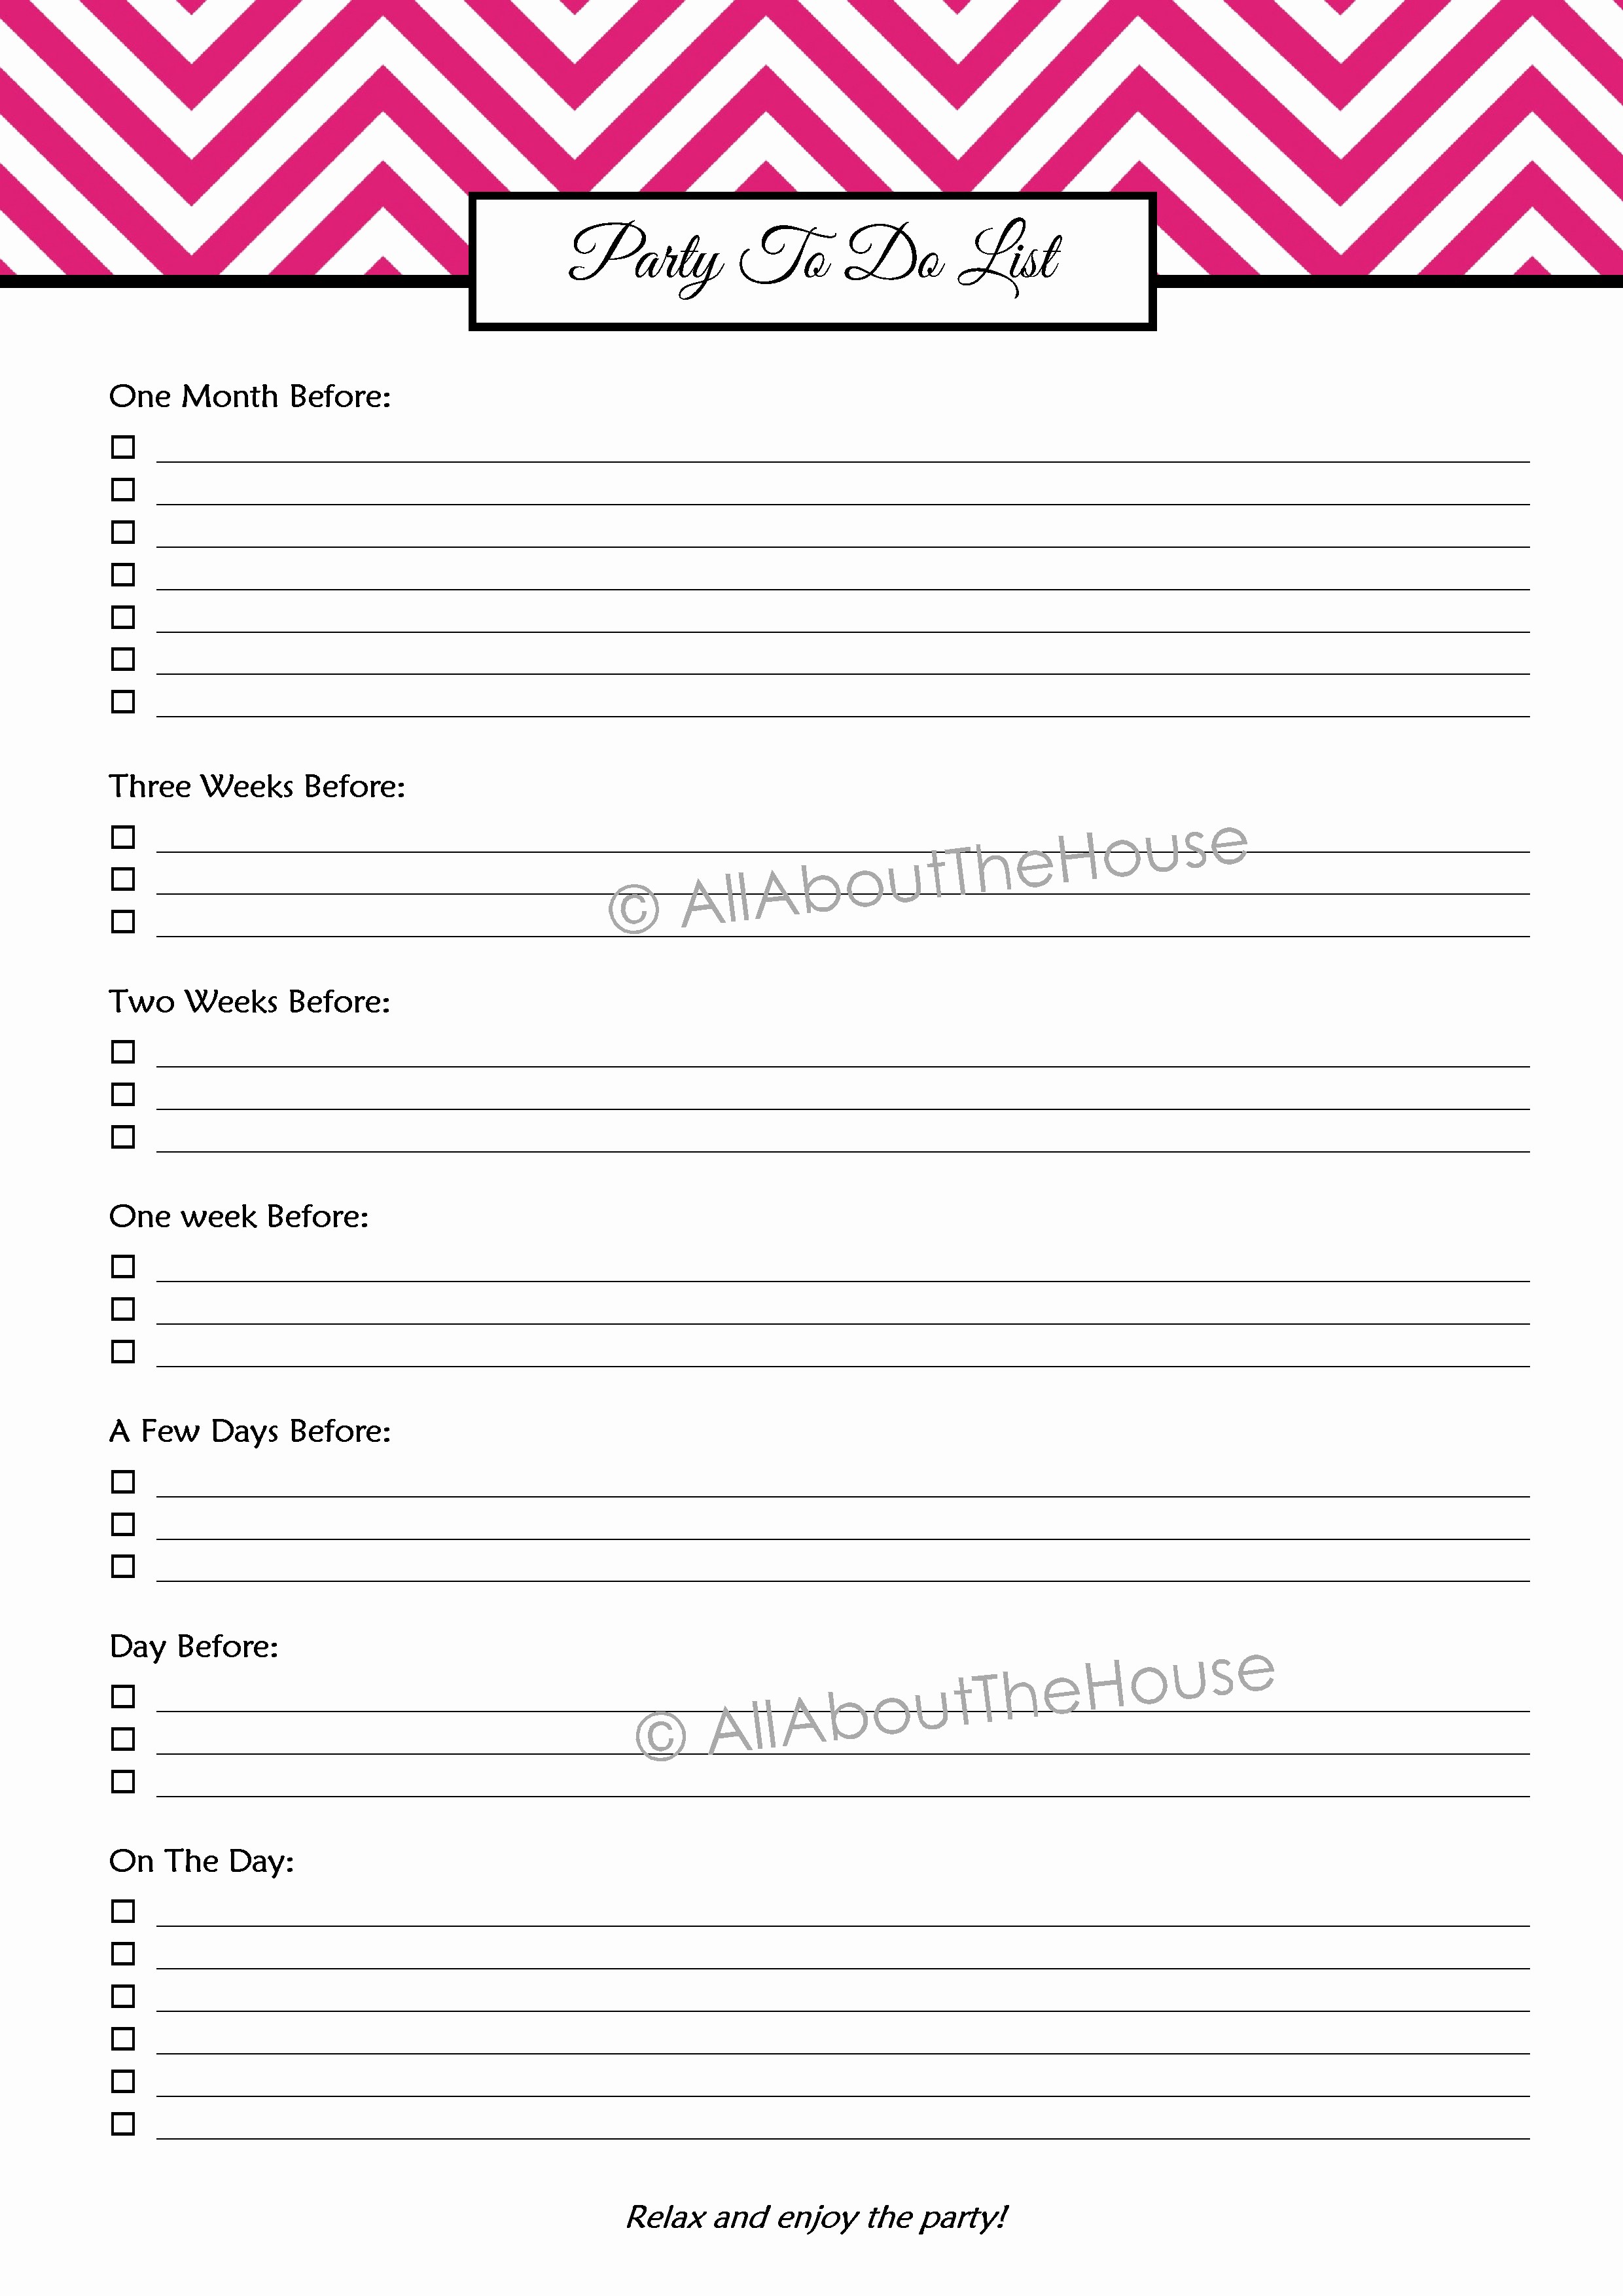 Party to Do List Template Luxury Party to Do List